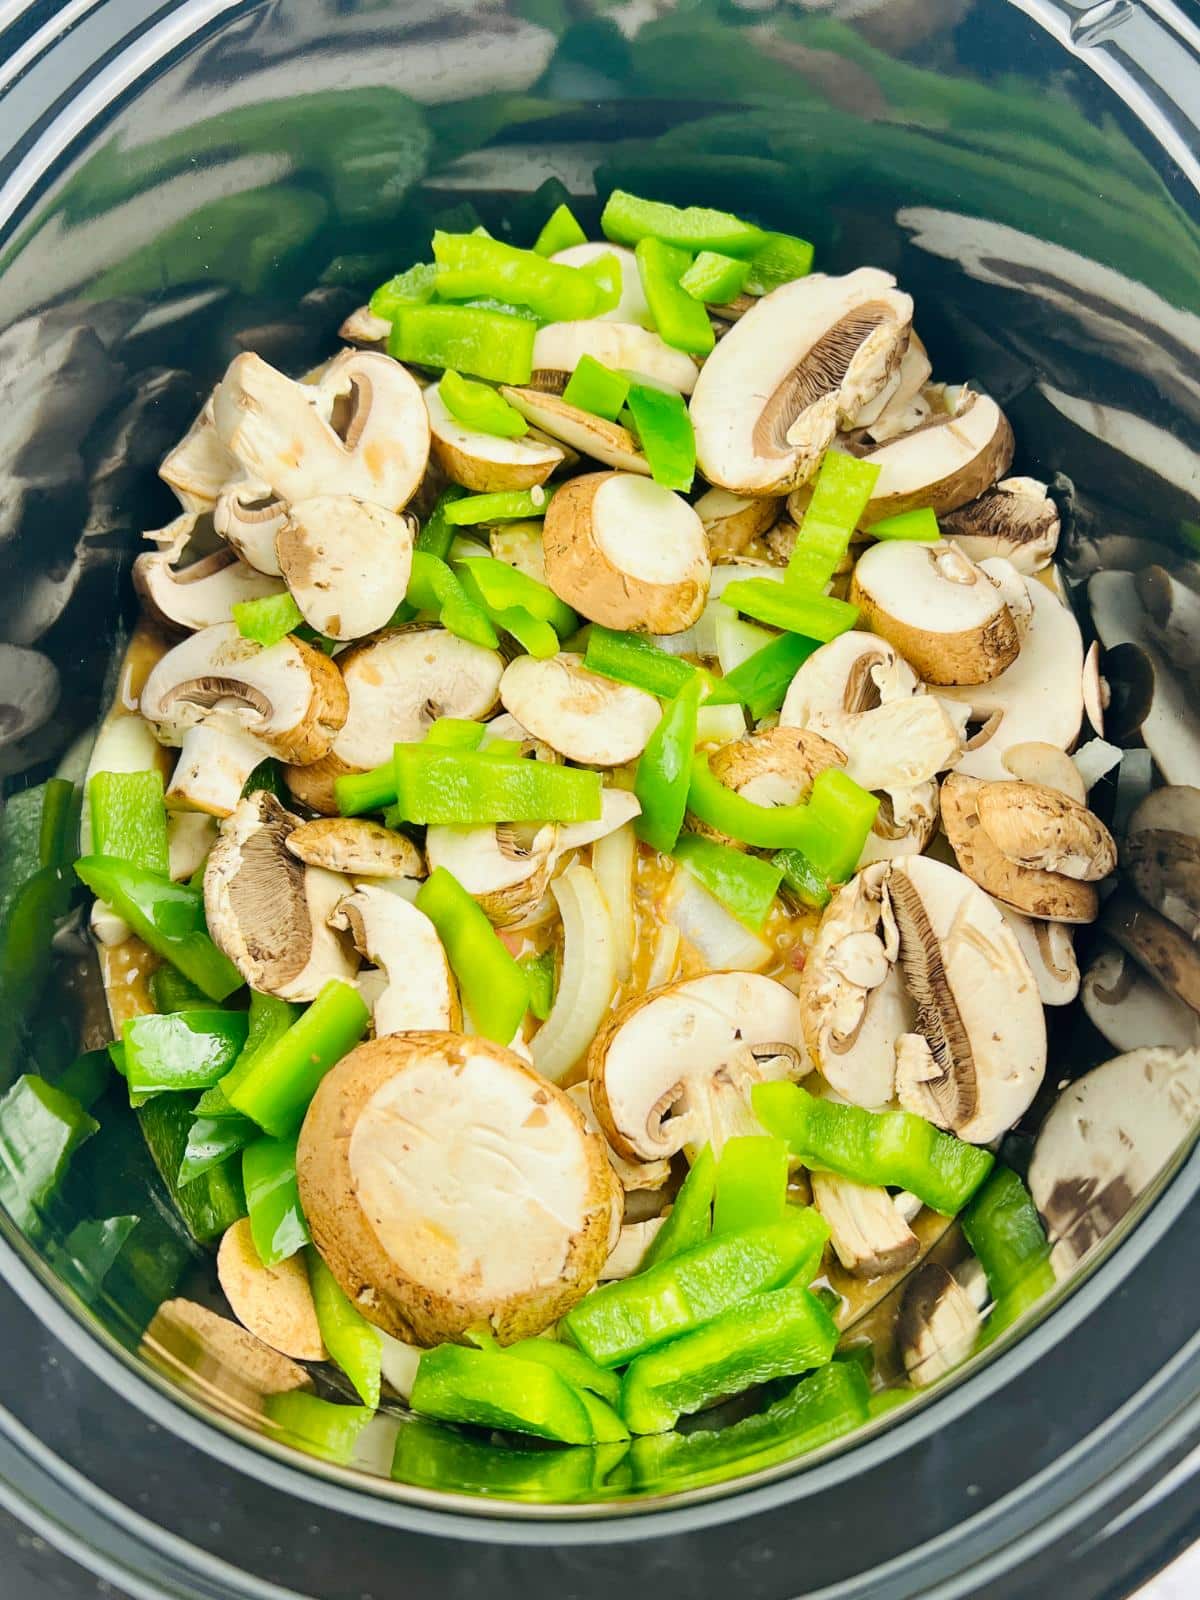 Mushrooms, onions and green bell peppers are added into a Slow Cooker.